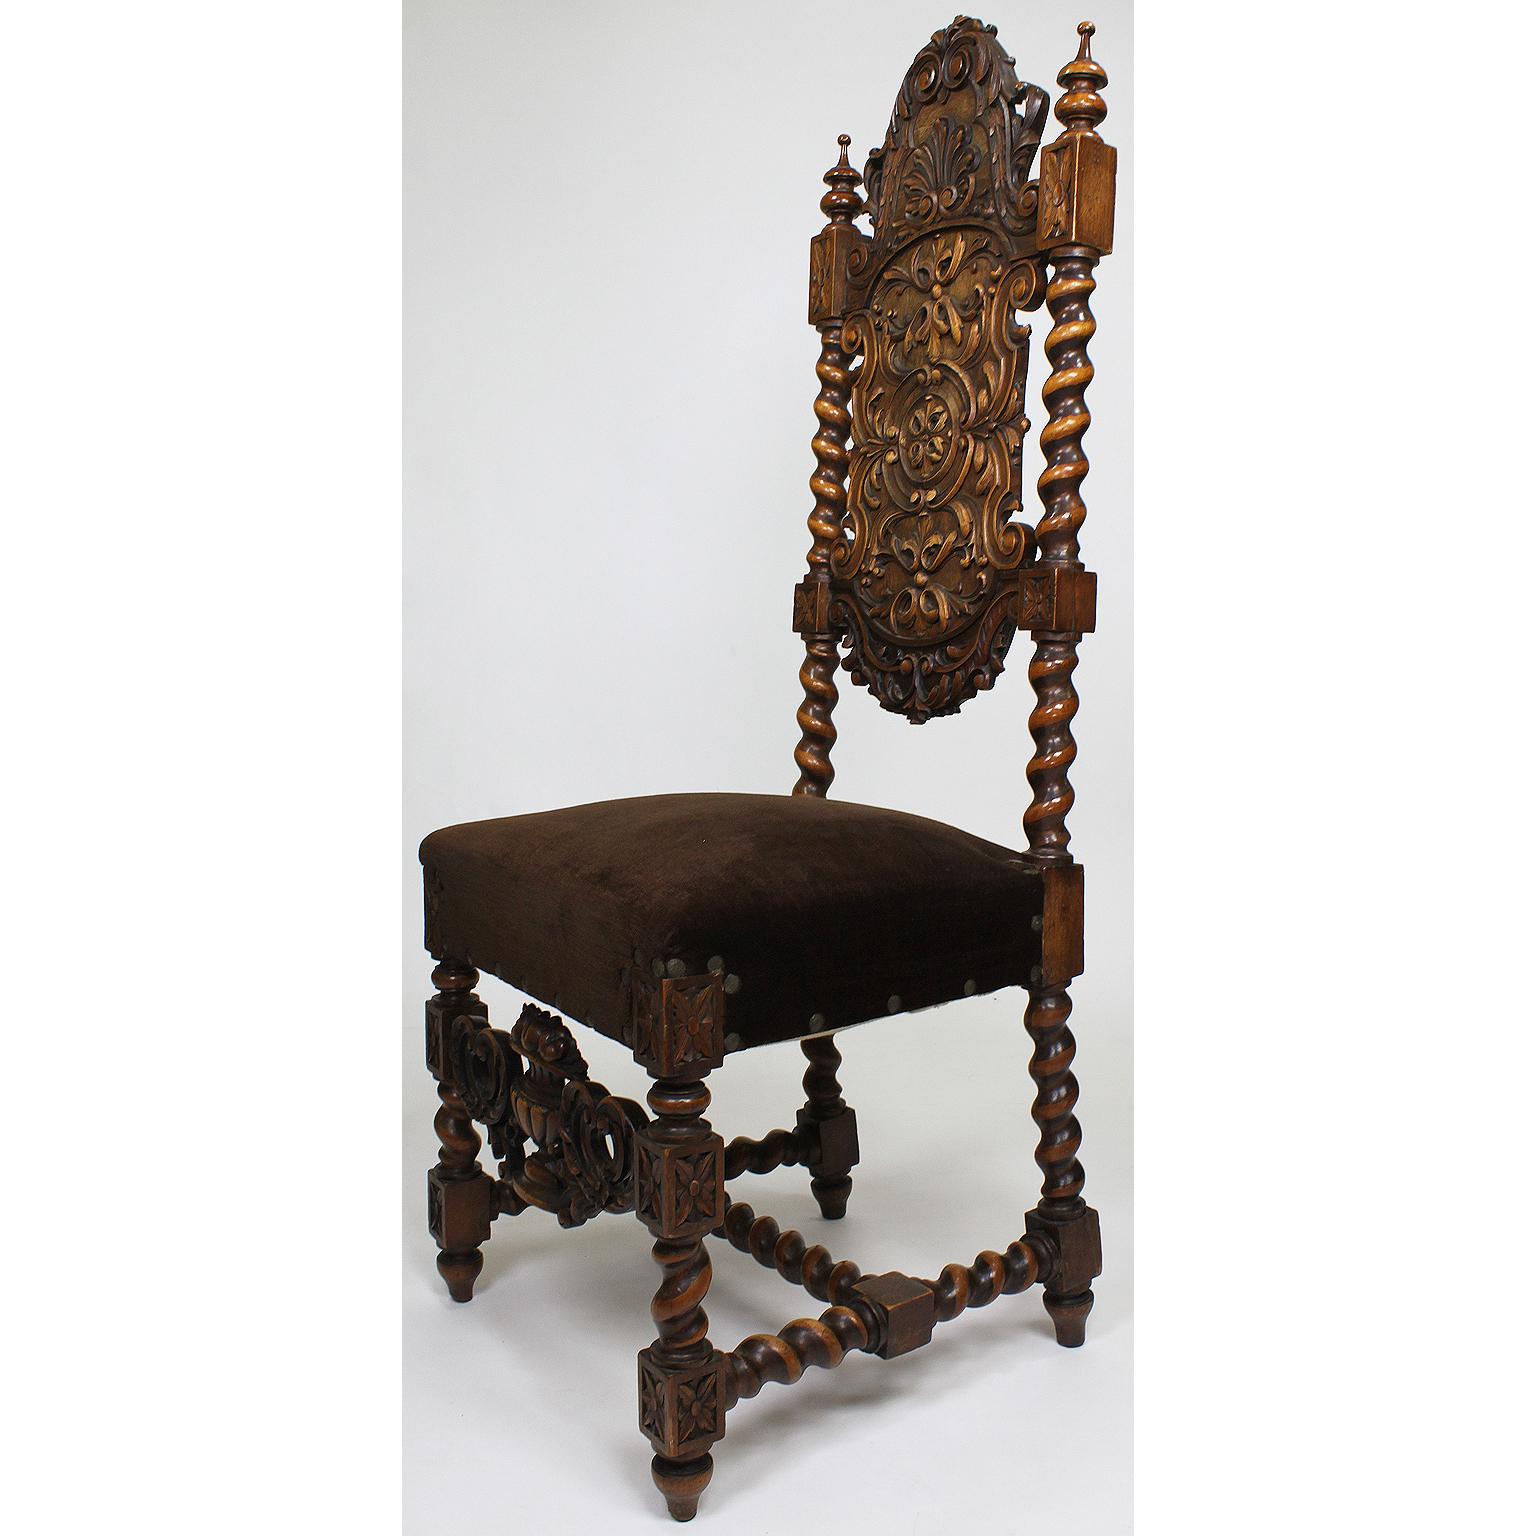 An Italian 19th-20th century Baroque Revival Solomonic style carved walnut side chair. The slender carved backrests flanked by scrolled carved columns, raised on similar quad-legs with carved urn and fruit cross-banded apron, circa